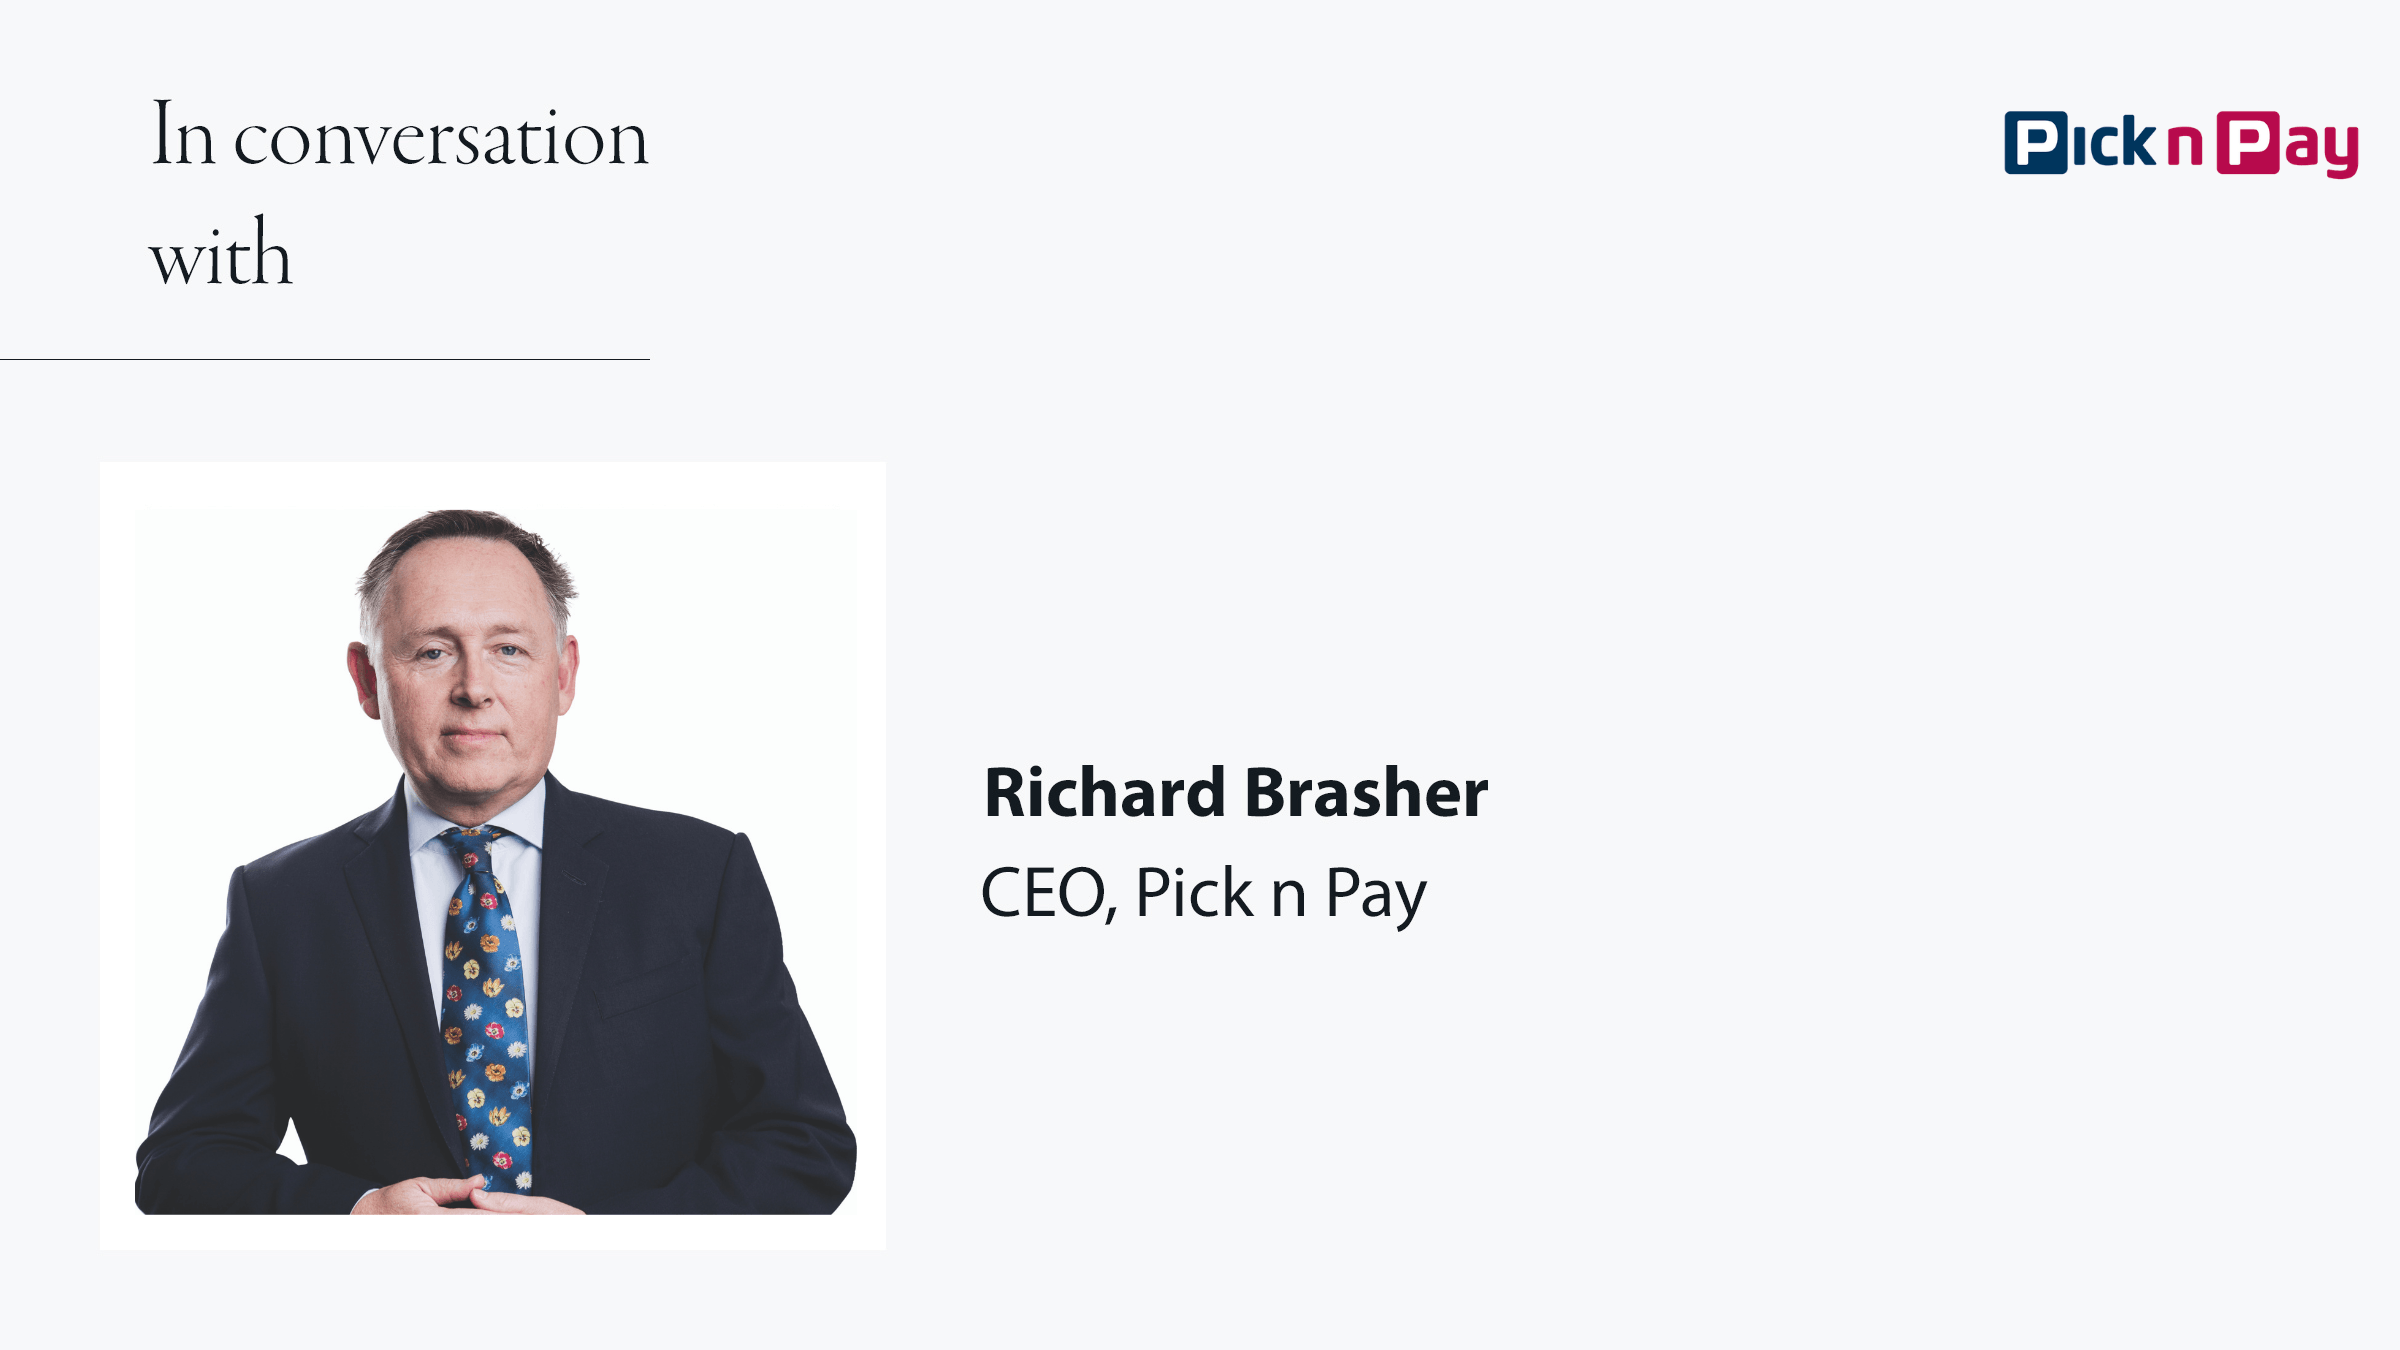 In conversation with Richard Brasher, CEO Pick n Pay 